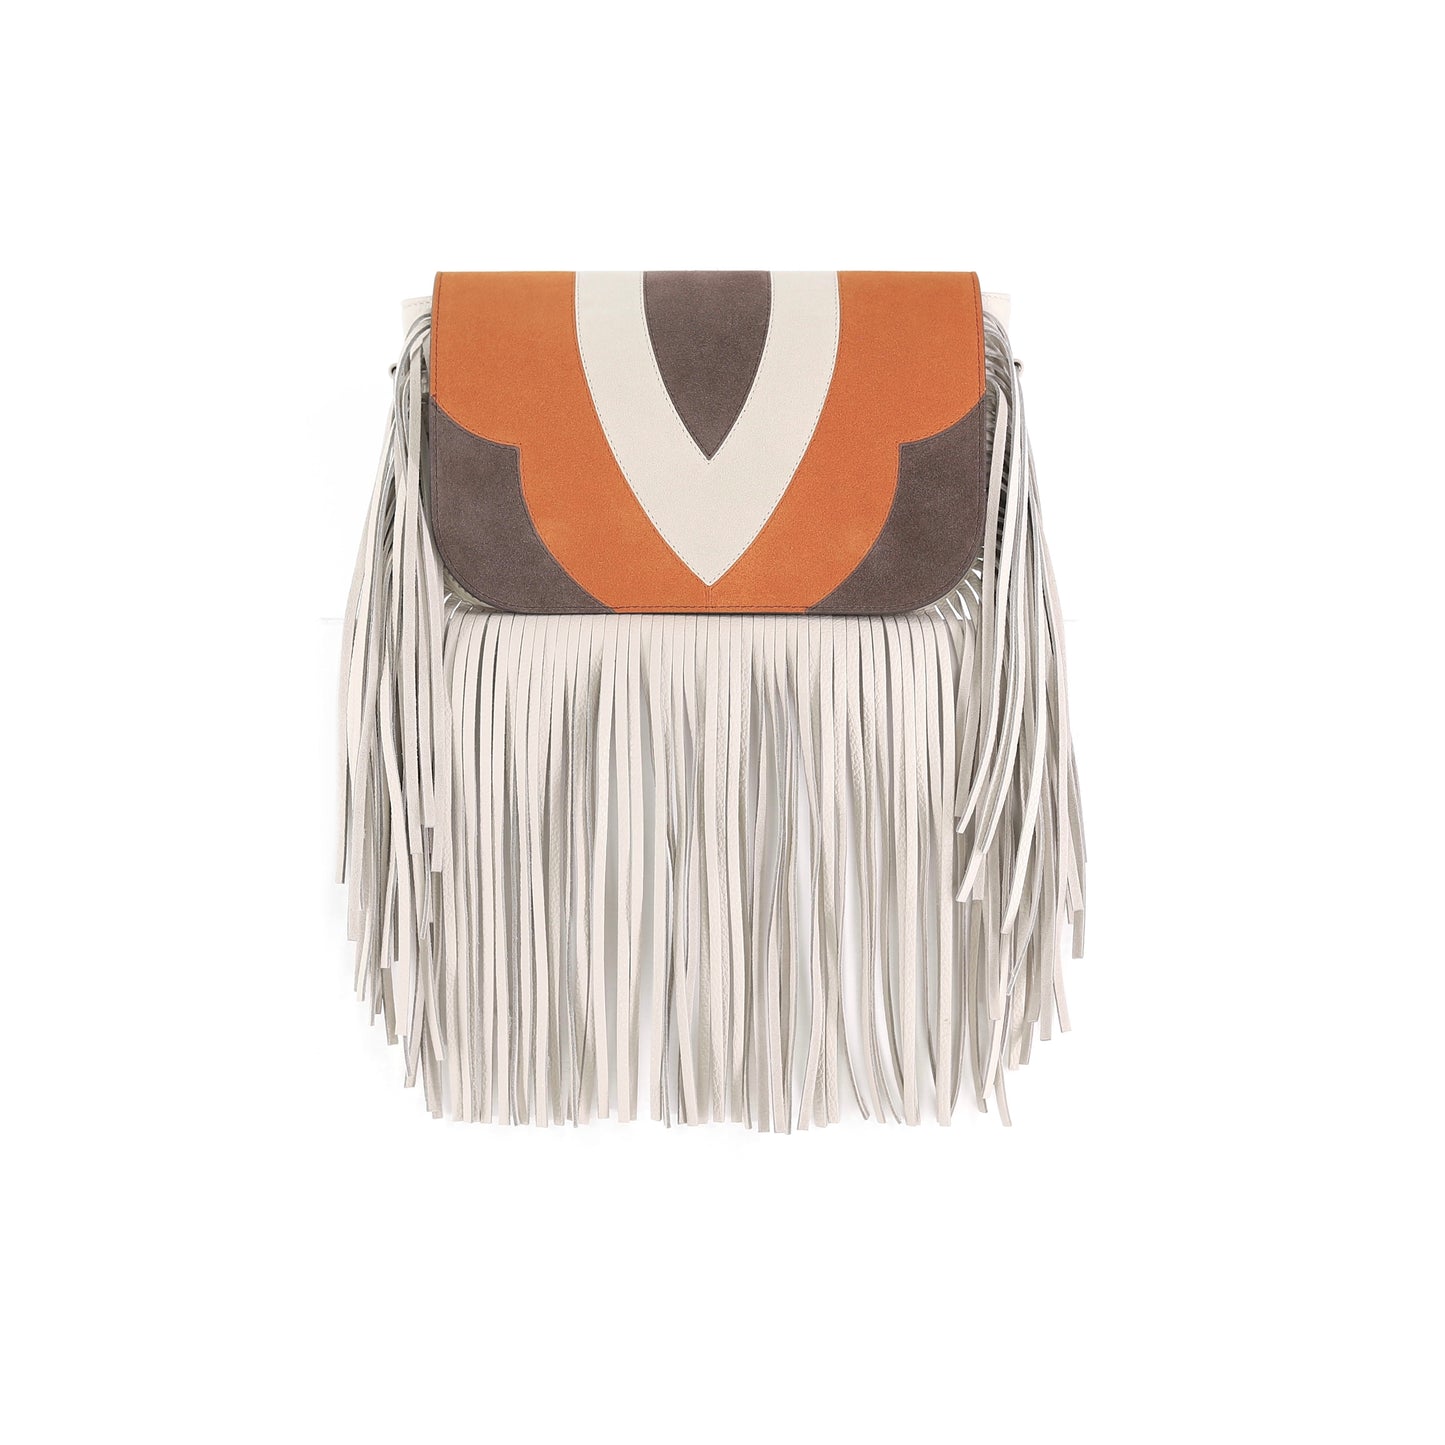 FREE SPIRIT flap suede leather orange brown small